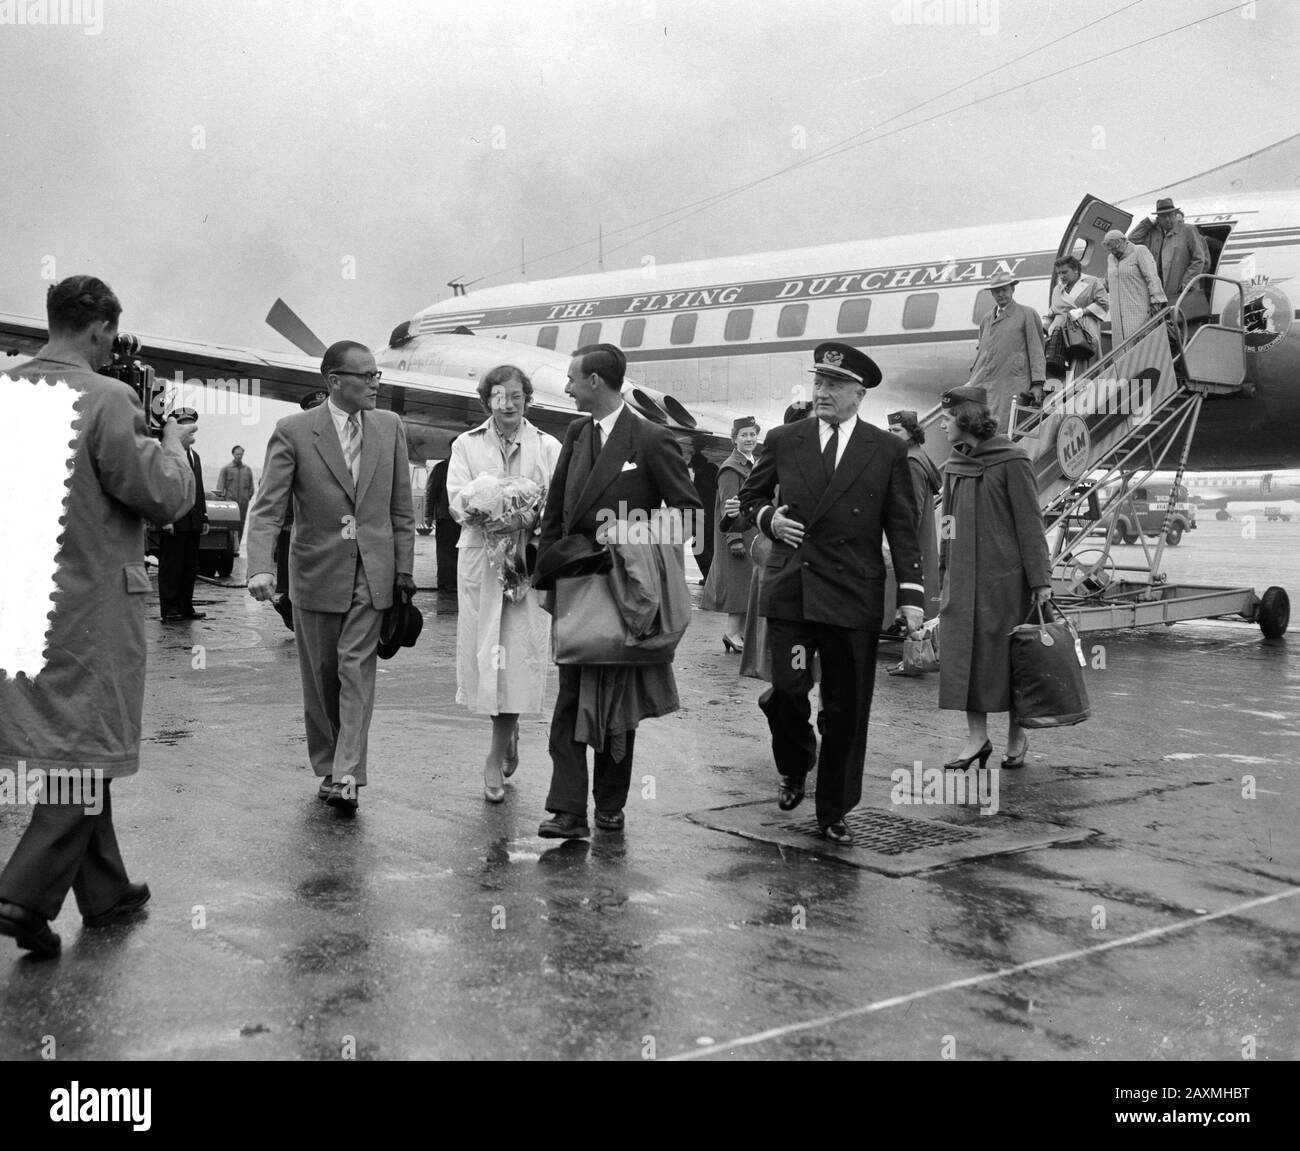 Original caption: Prince Jean and Princess Josephine Charlotte of Luxembourg in transit at Schiphol. - National Archives Stock Photo